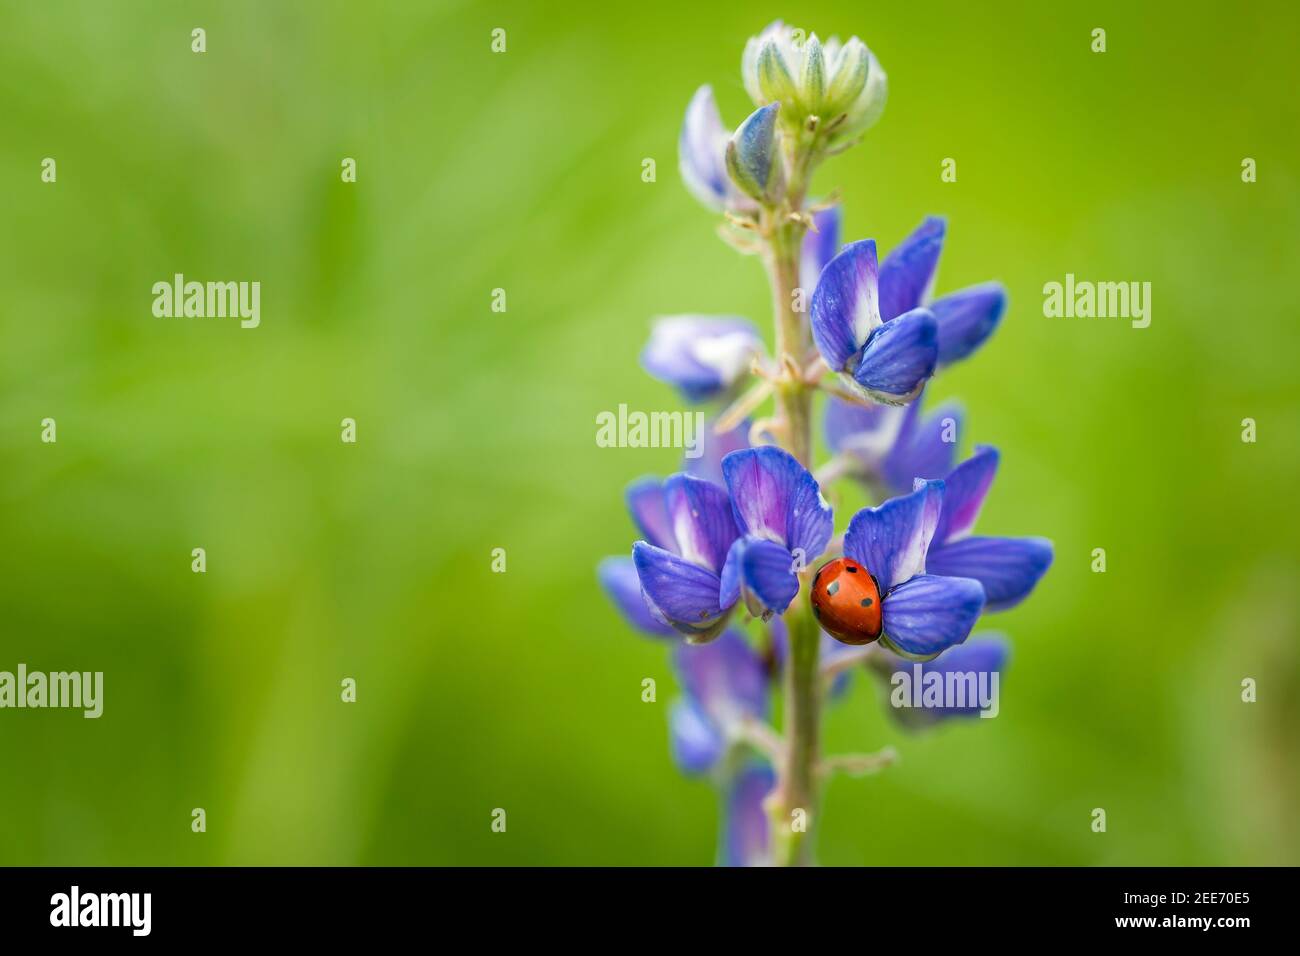 A Ladybug (Ladybird Beetle, Coccinellidae) on a blue and purple wild lupine (Lupinus Perennis) during spring with a blurred green background Stock Photo